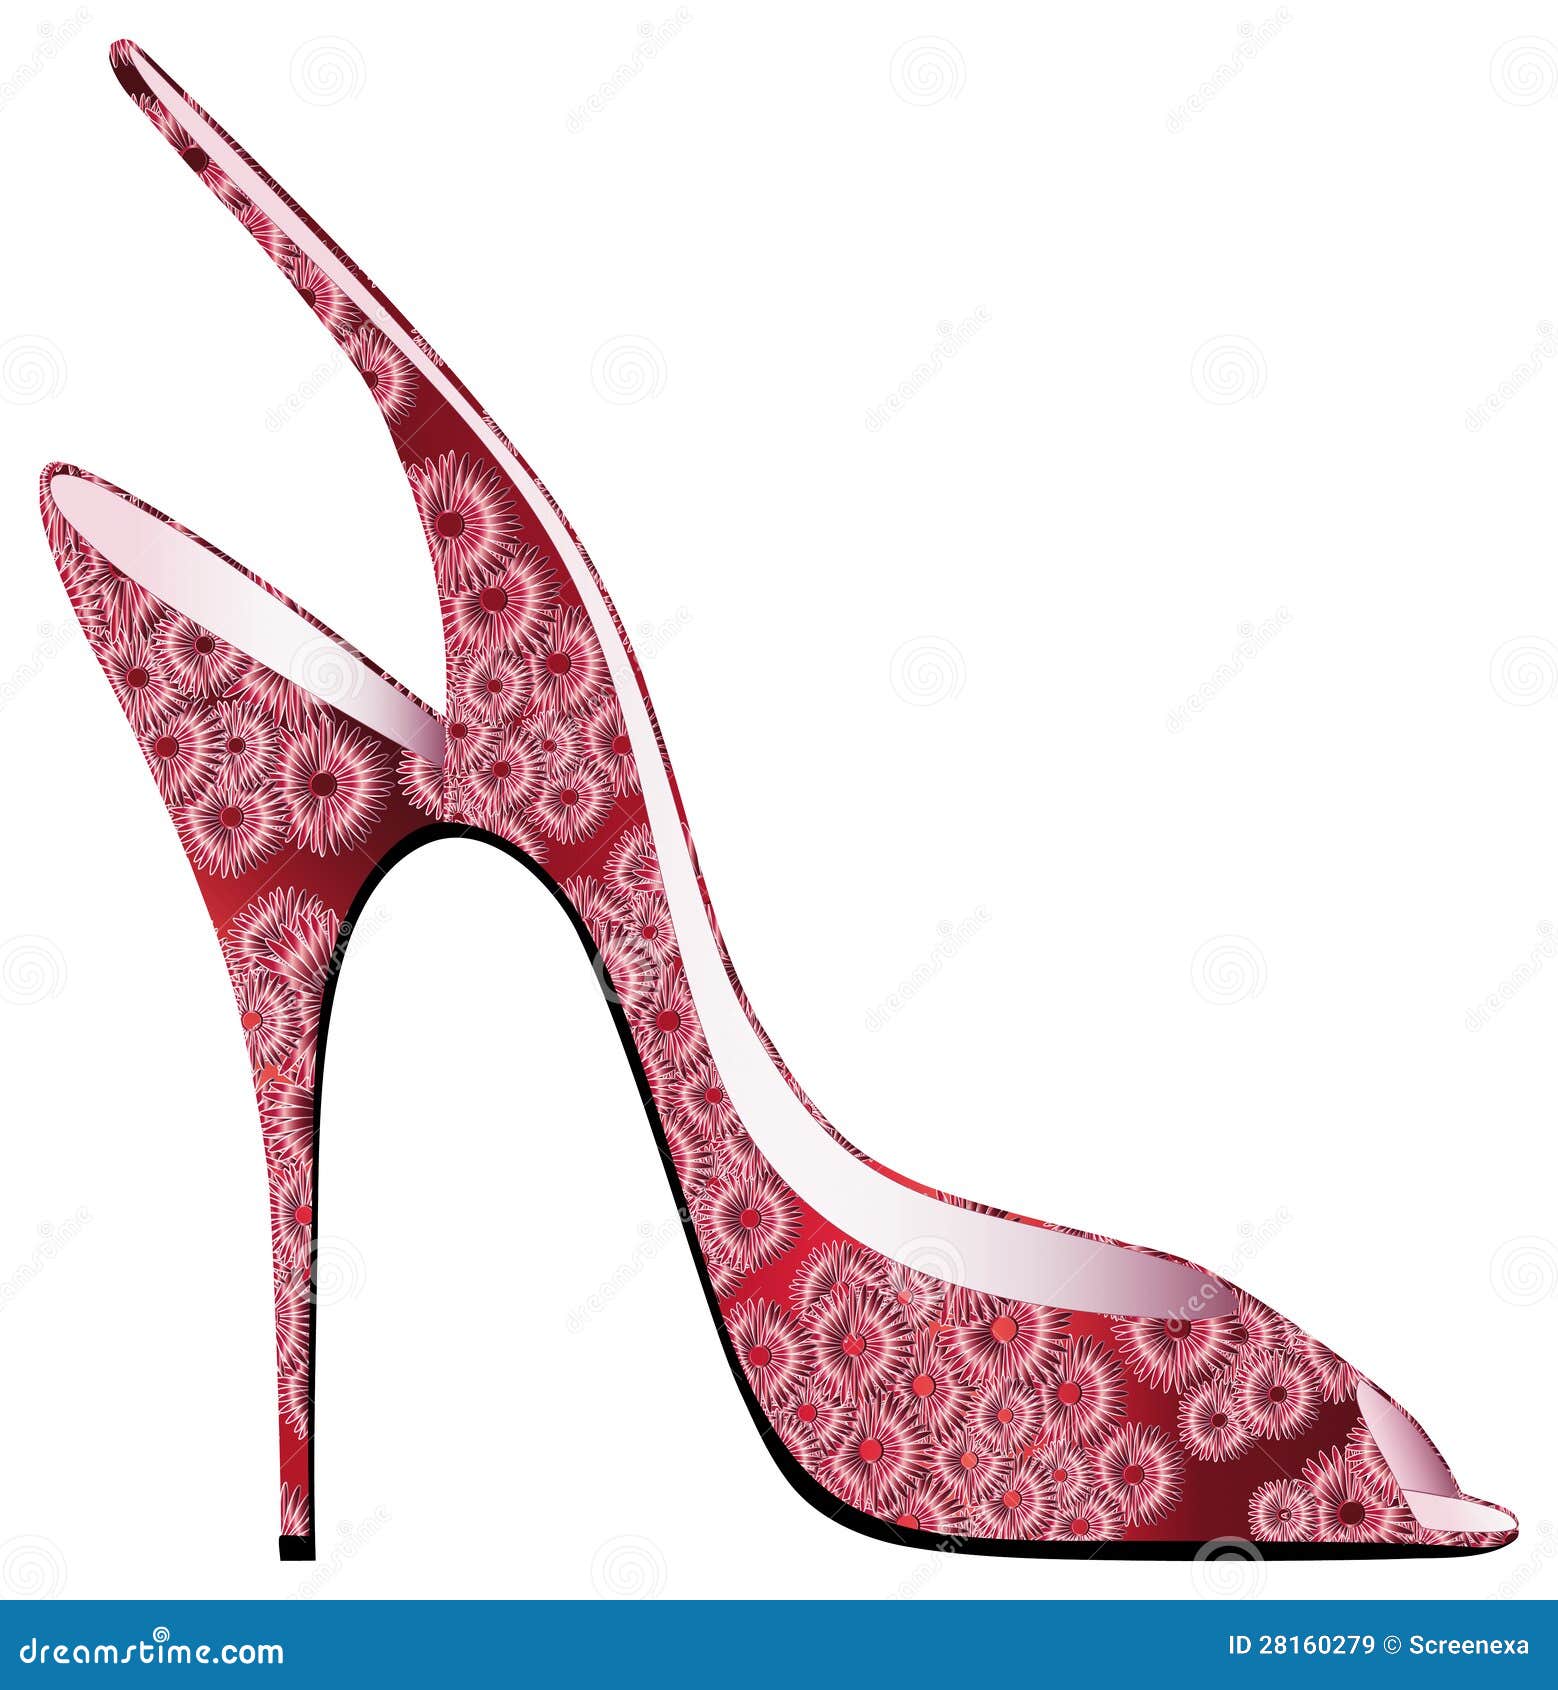 Red Sandal with Appliqued Blossoms Stock Vector - Illustration of dark ...